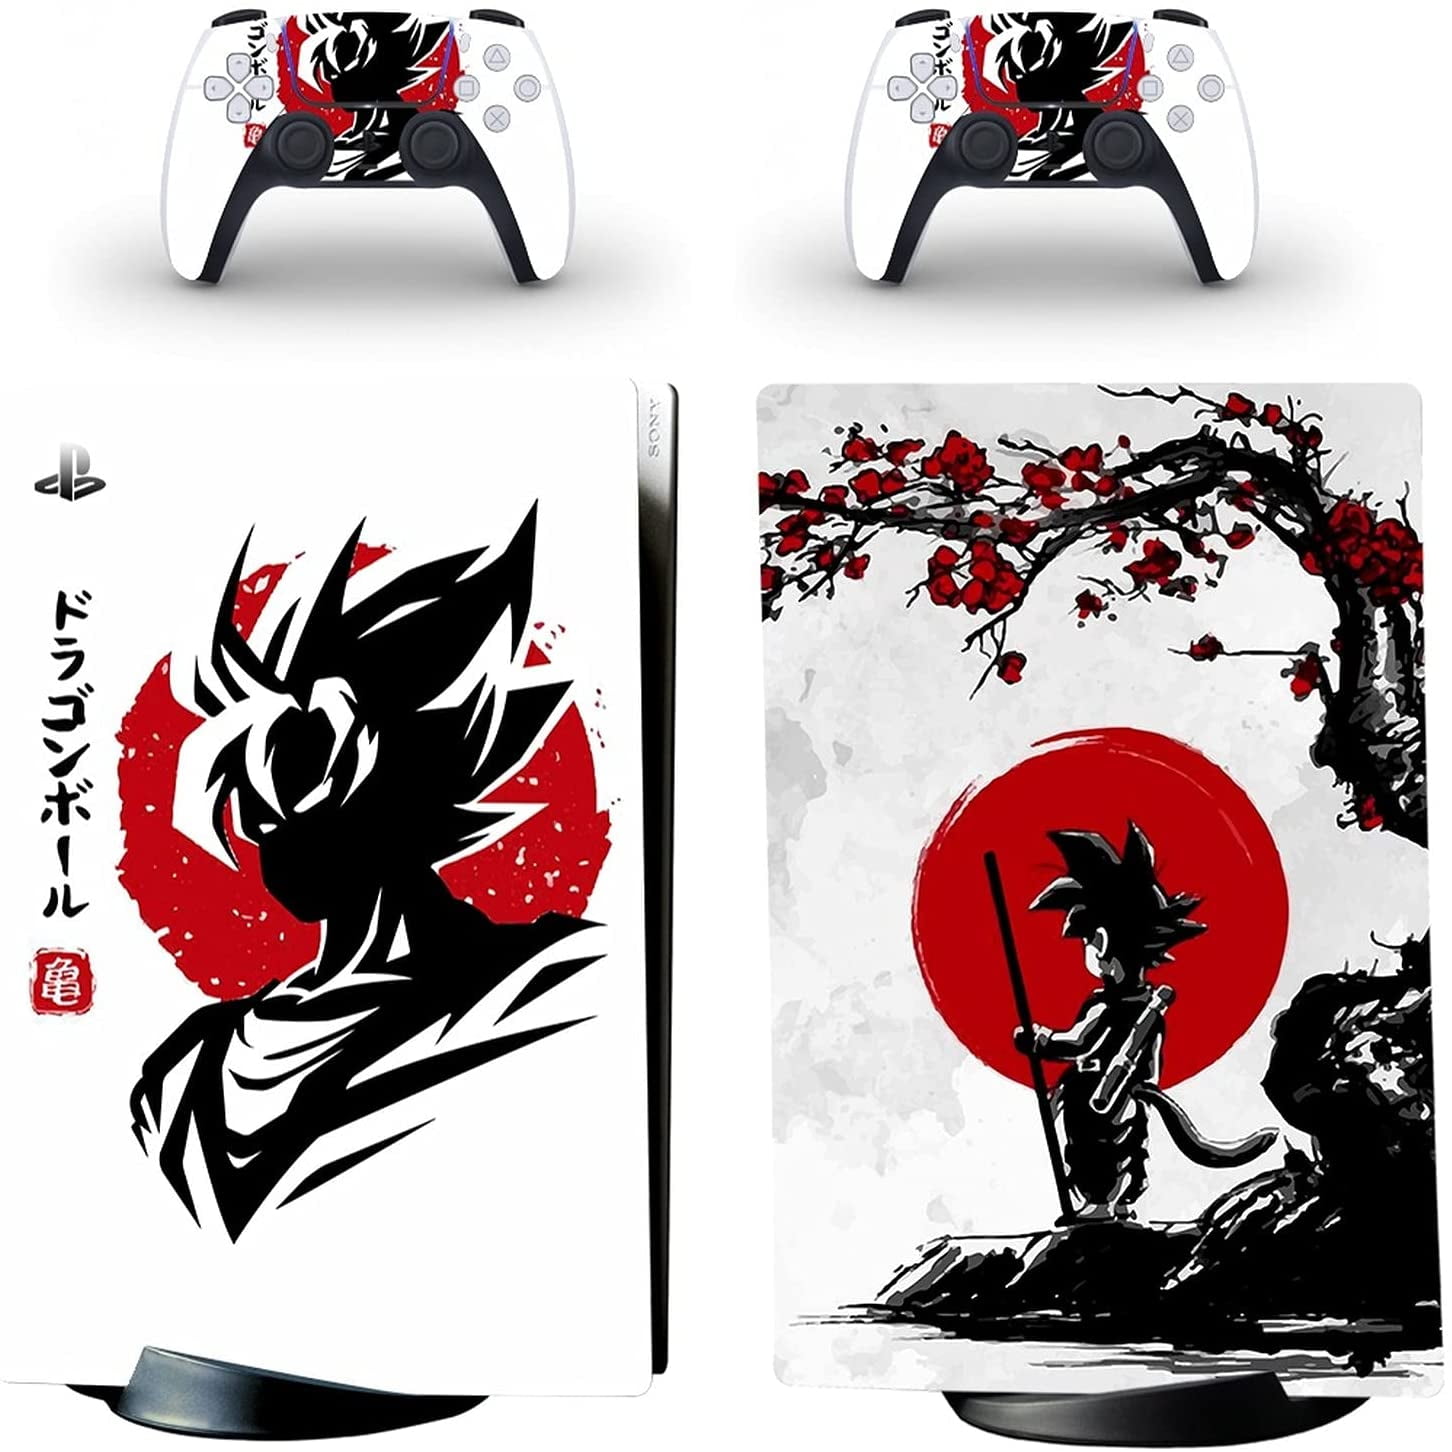 Tatum88 Ps5 Skin Disc Edition Anime Console And Controller Vinyl Cover Skins  Wraps Color StickerPs5 Skin Disc Edition Anime Console And Controller Vinyl  Cover Skins Wraps Color Sticker  Walmart Canada